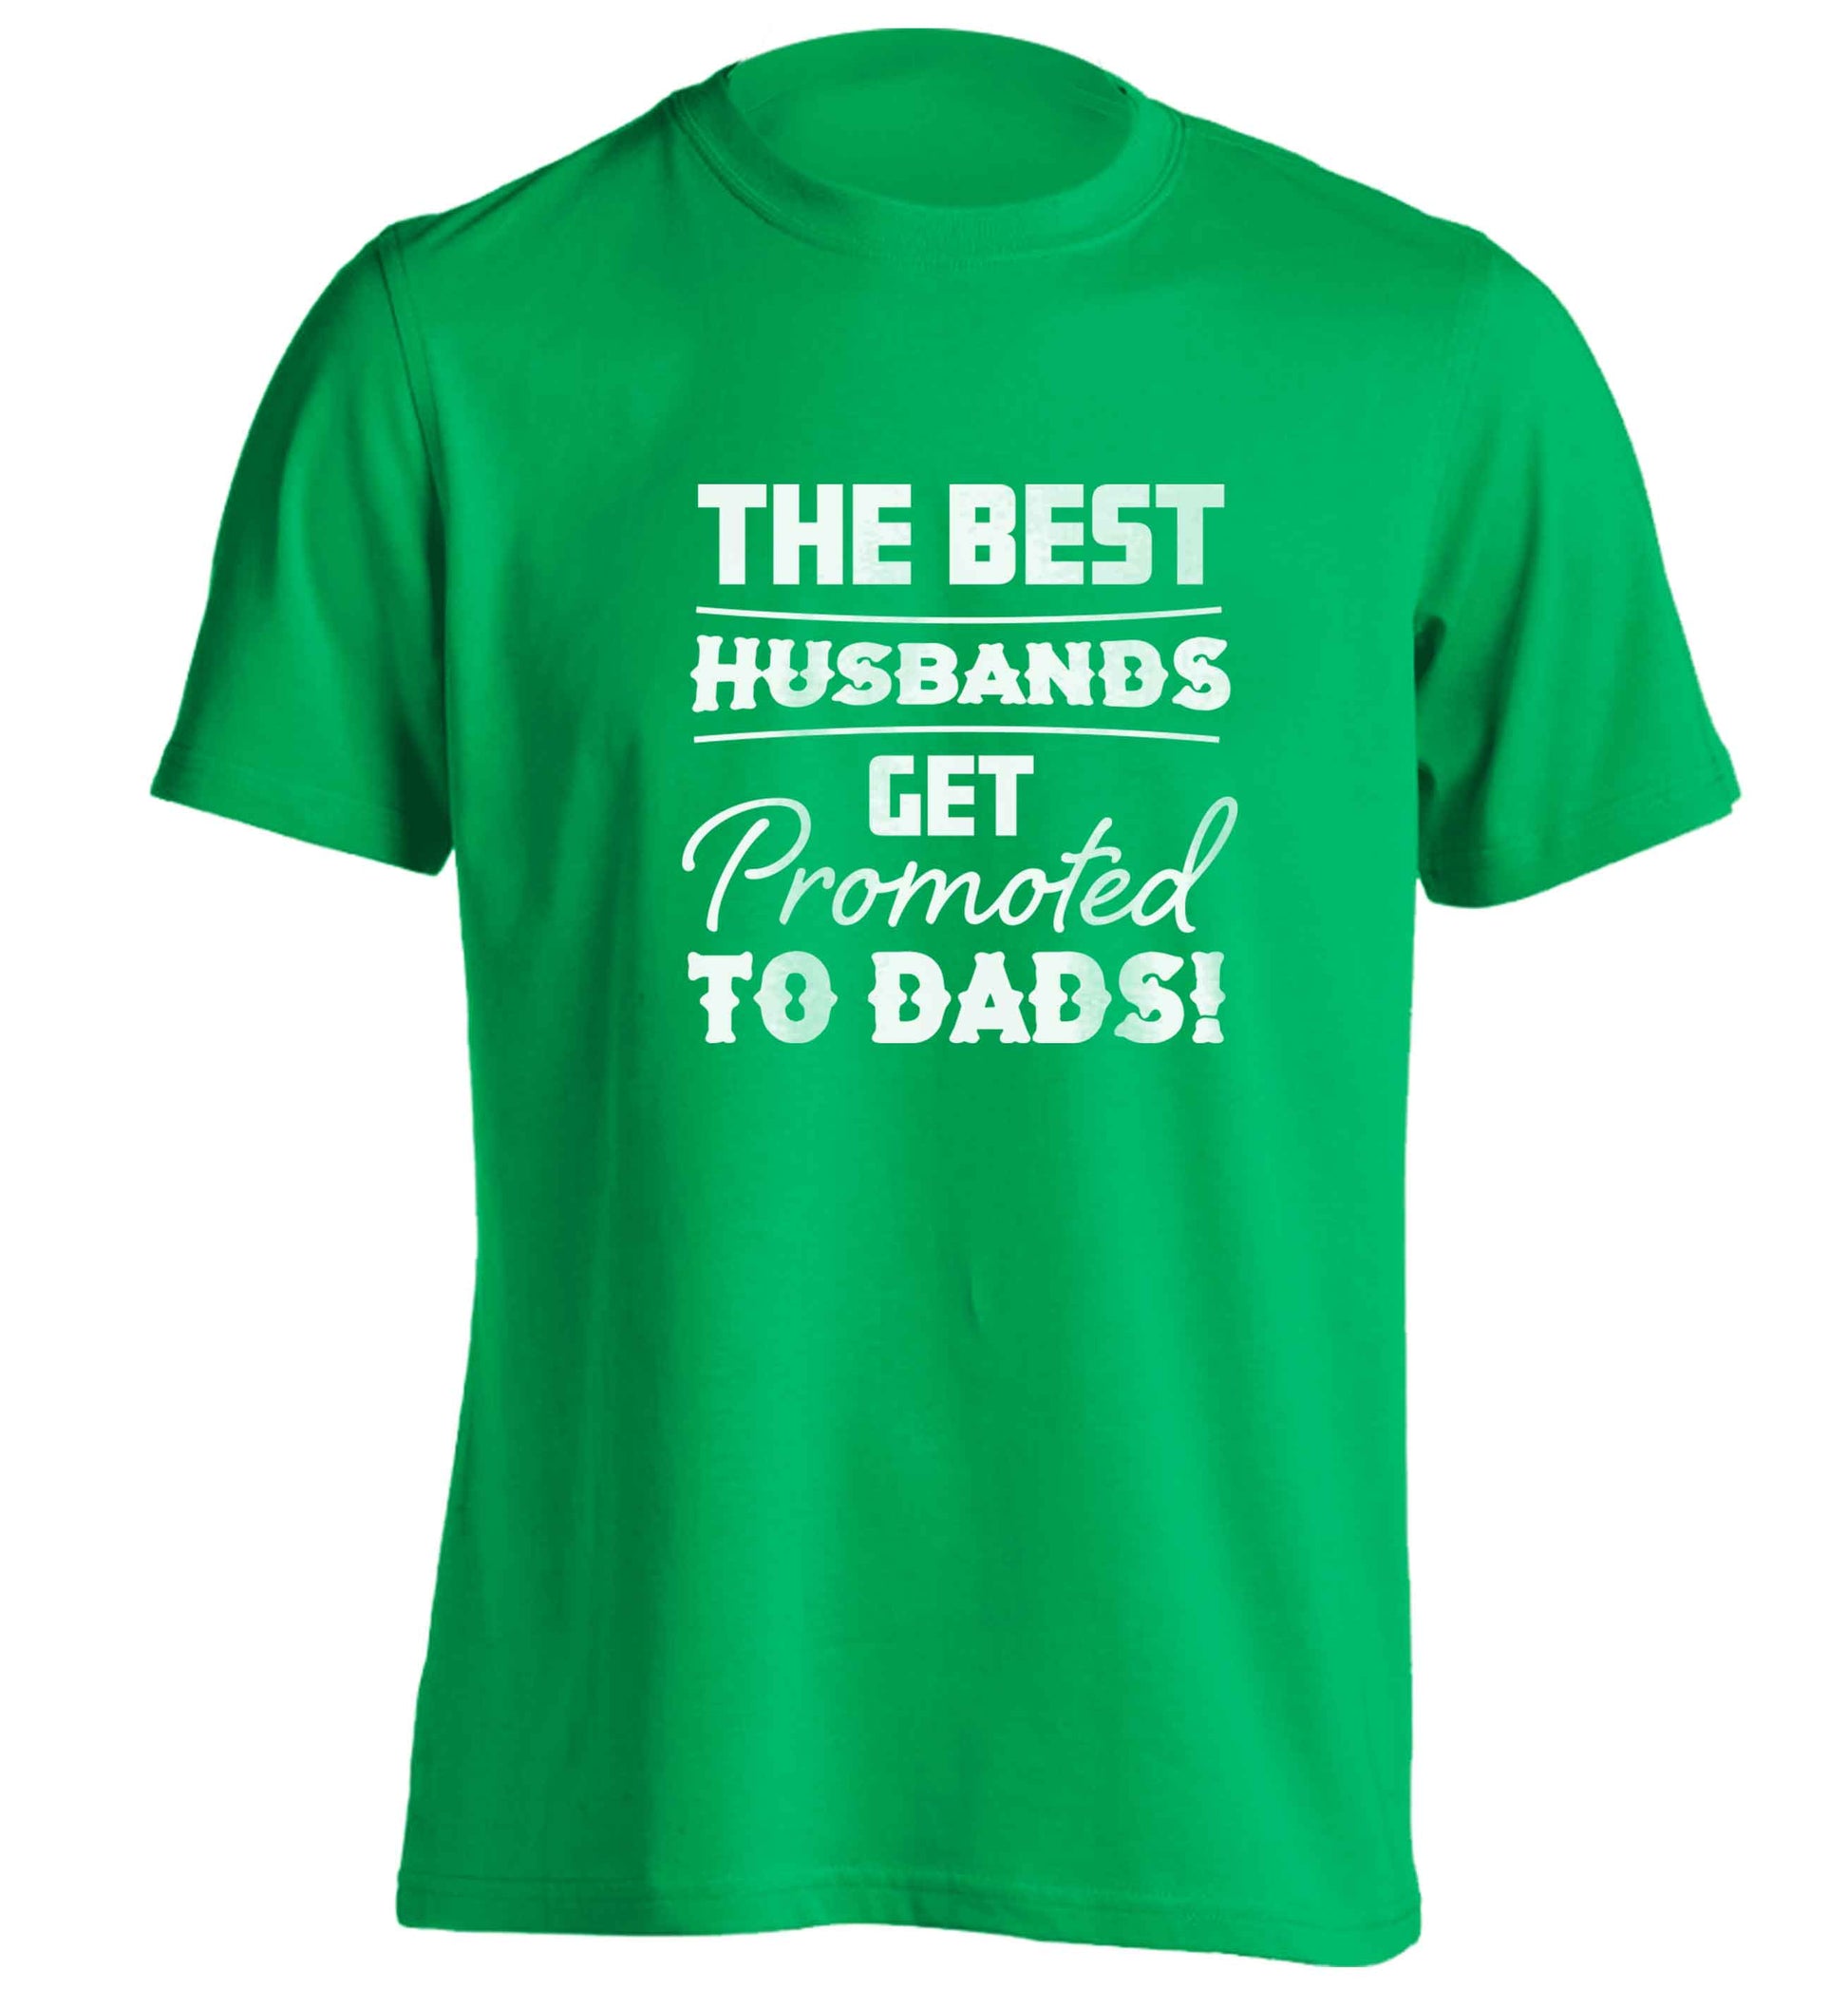 The best husbands get promoted to Dads adults unisex green Tshirt 2XL